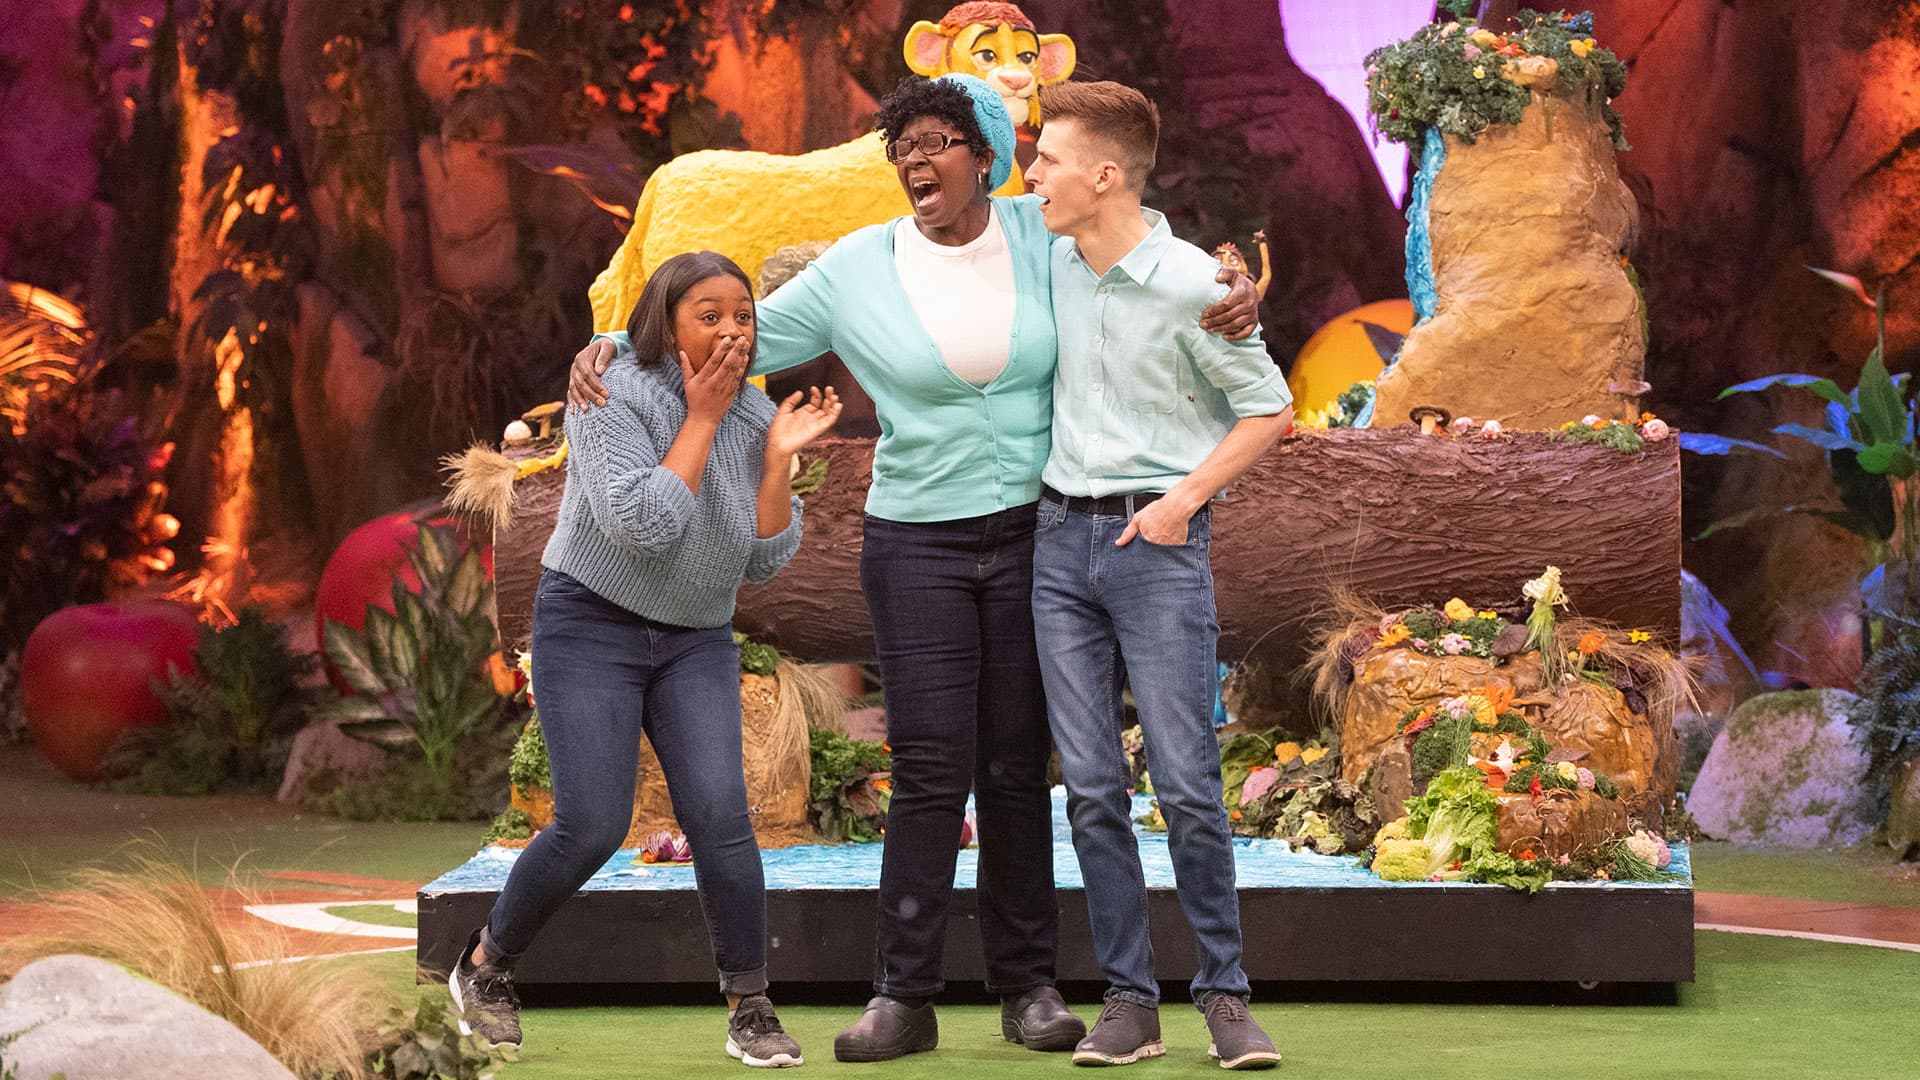 London, Schellie and Austin react to learning they have won the “Lion King: Queen of the Jungle” contest on Disney’s “Foodtastic”